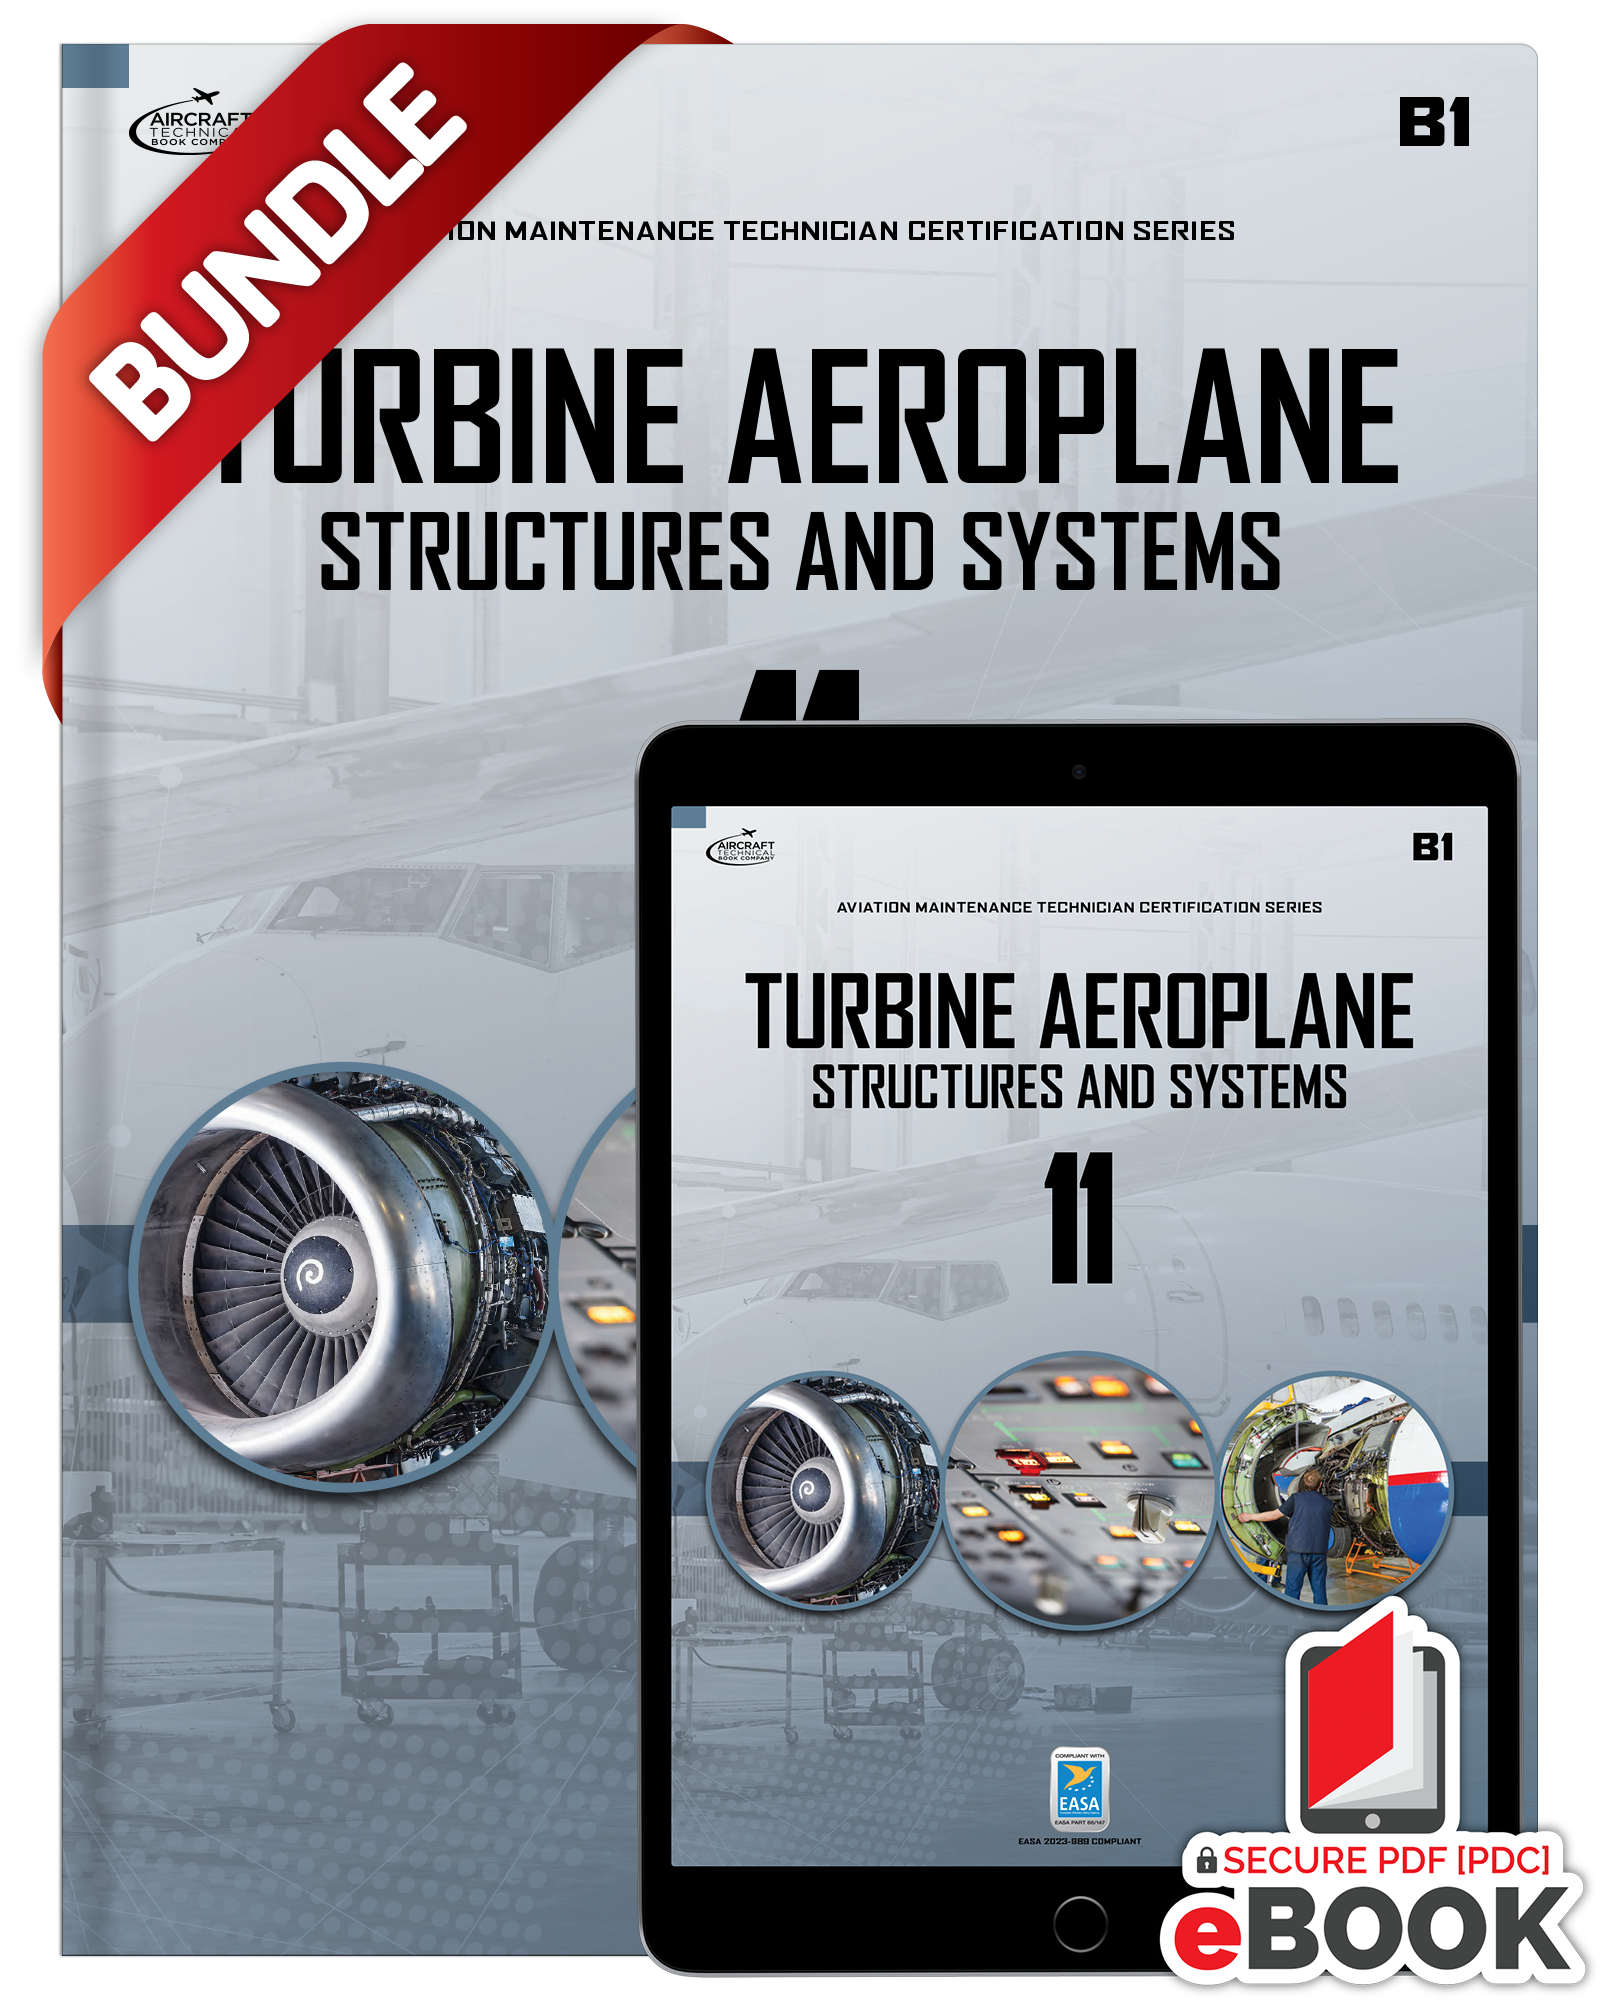 Turbine Aeroplane Structures and Systems: Module 11 (B1) - Bundle